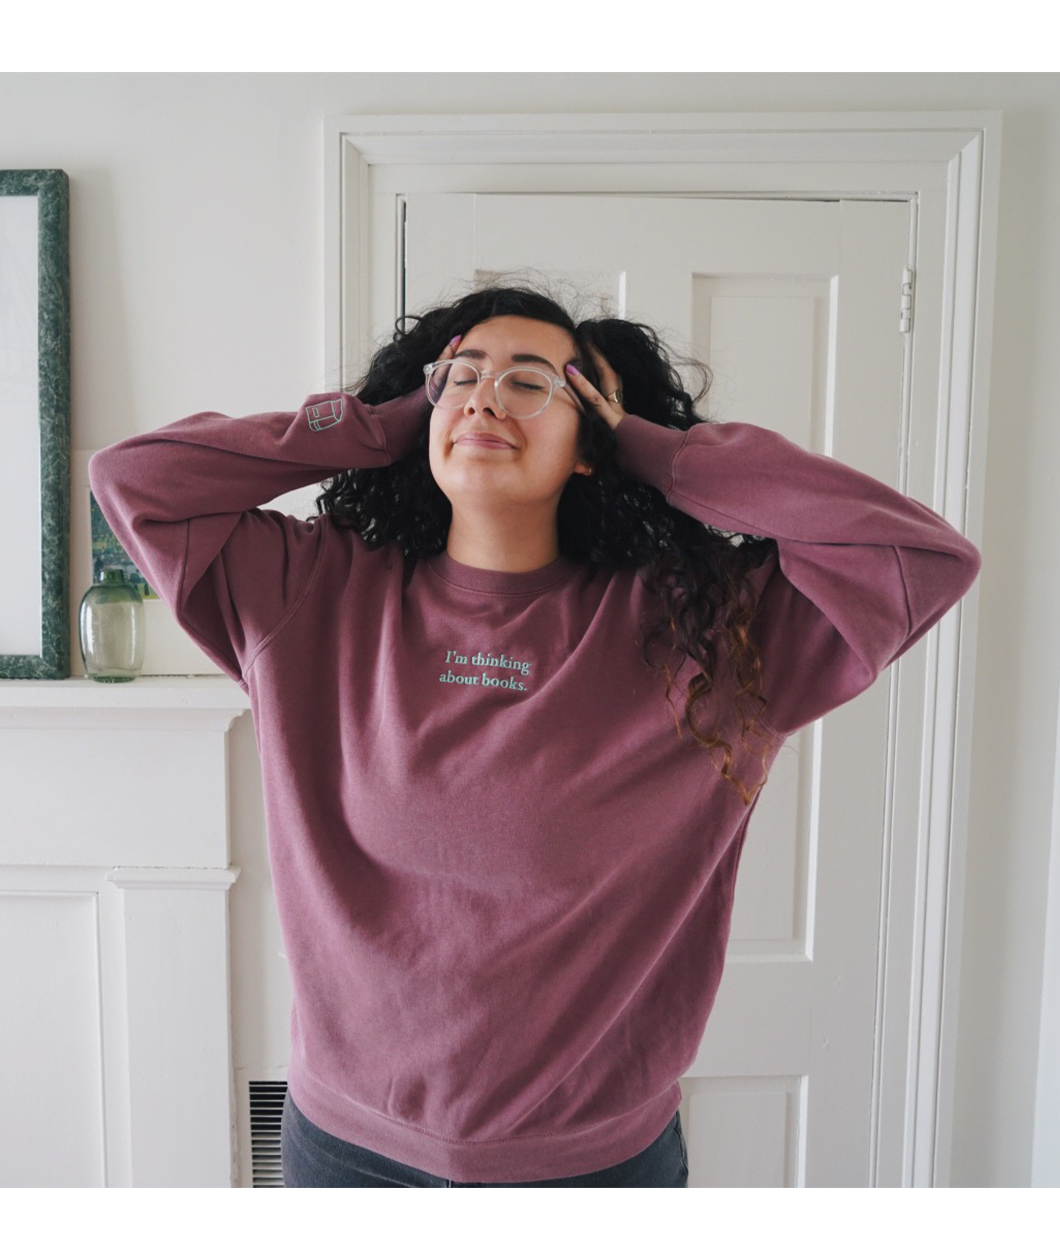 Ariel Bissett modeling a dusty rose sweatshirt with mint green writing on the front.